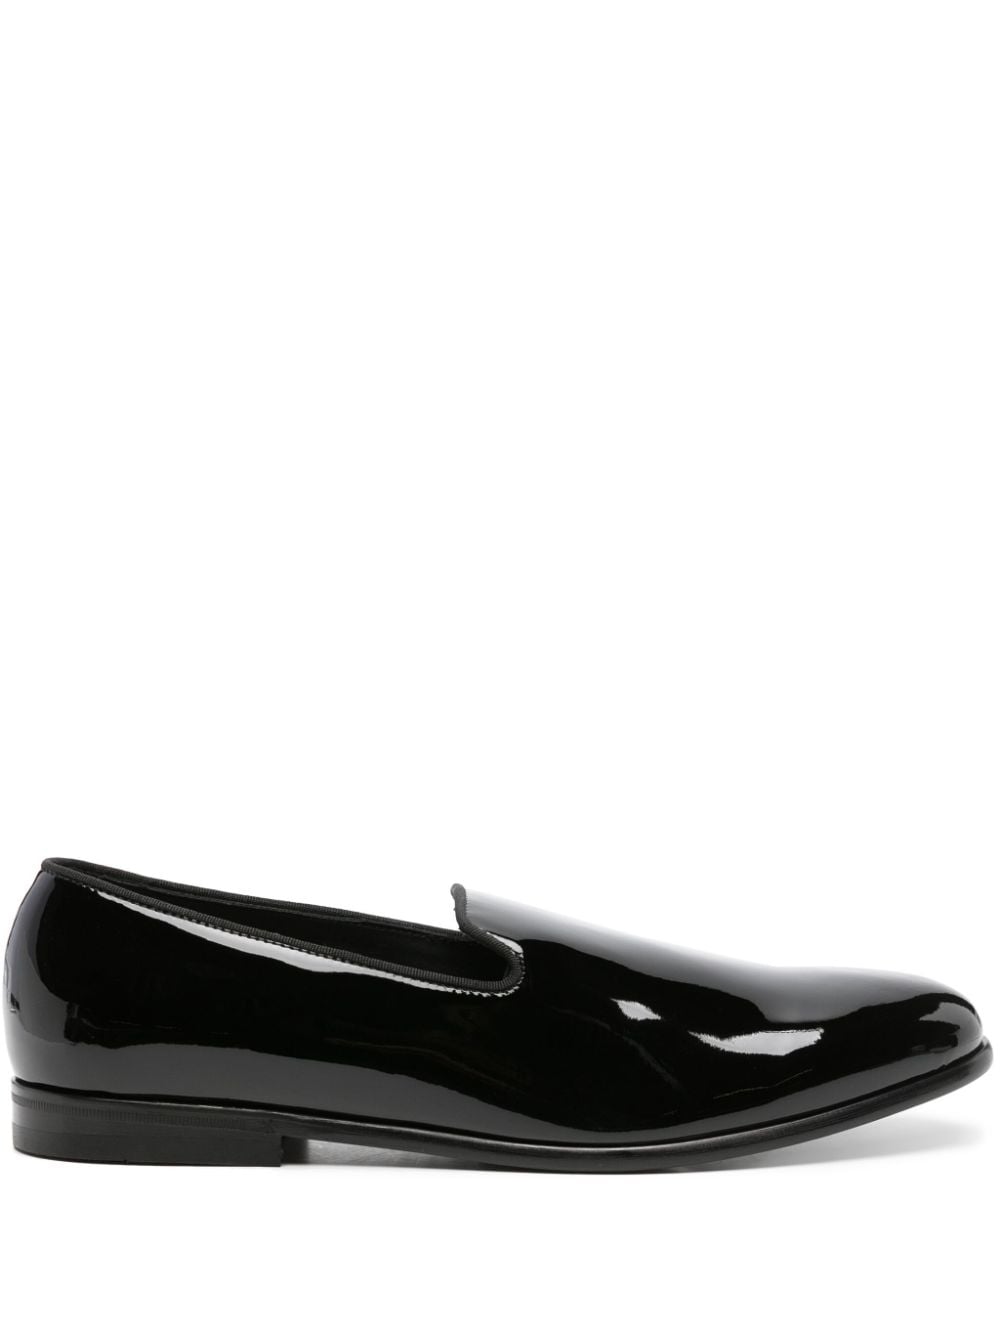 Doucal's patent leather loafers - Black von Doucal's